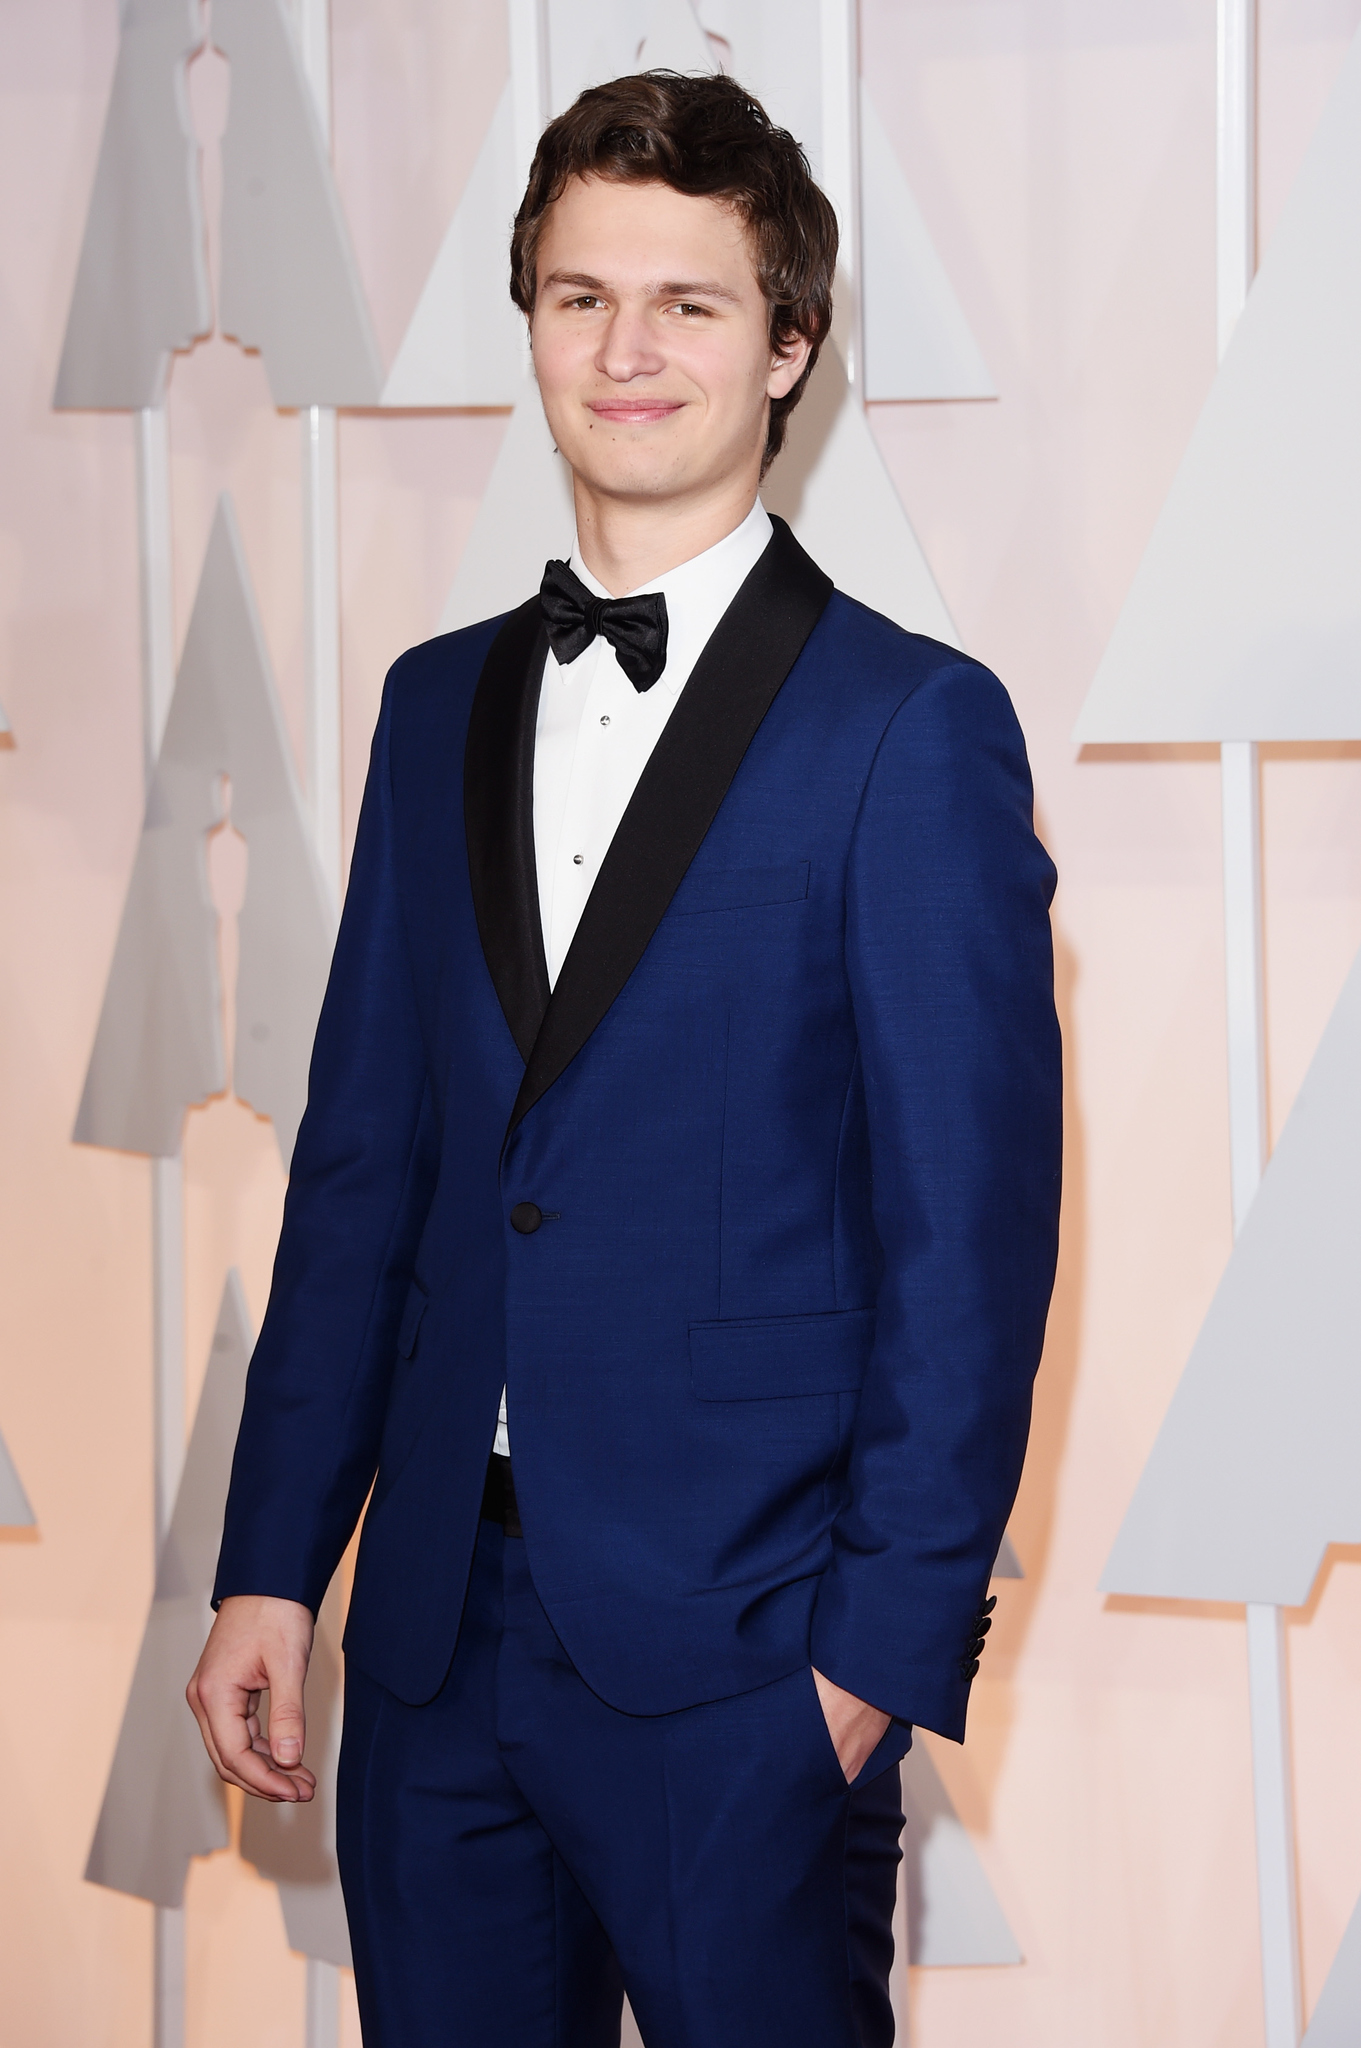 Ansel Elgort at event of The Oscars (2015)